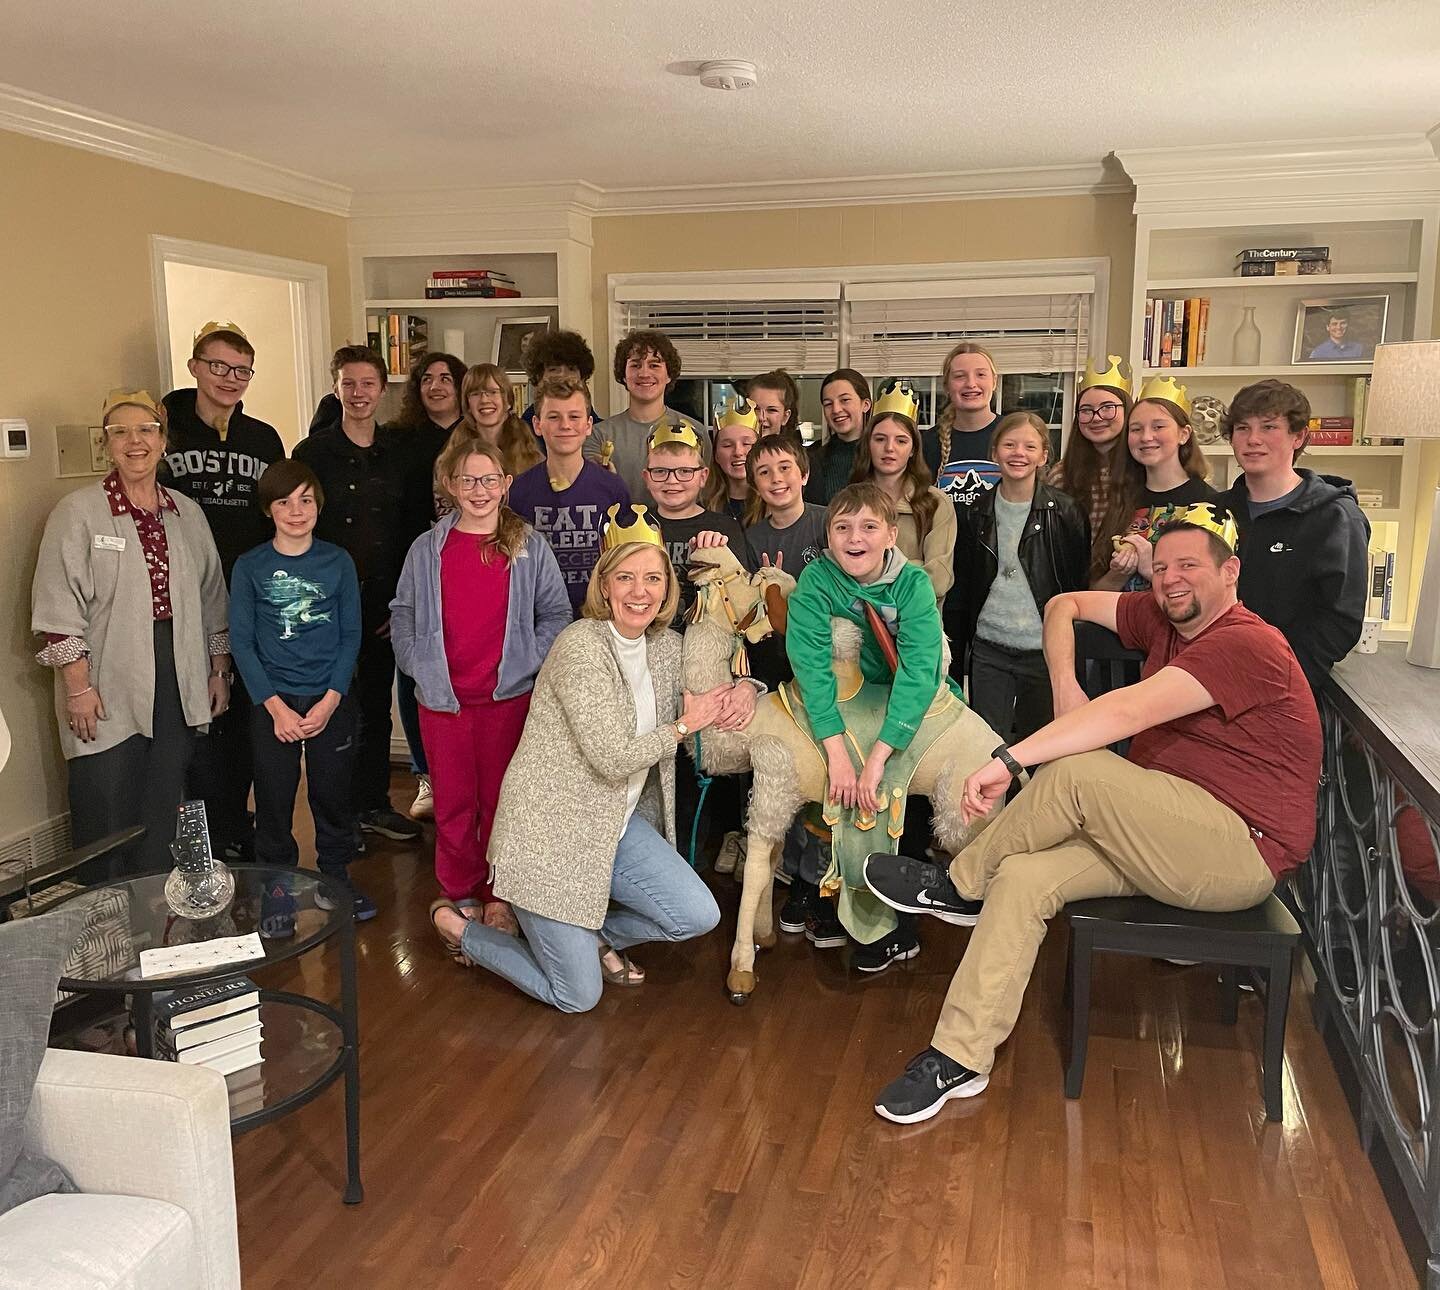 Clyde and the Gang had tons of fun at the Epiphany Party at the Parsonage!  Thanks to Pastor Willis for opening up her home to us!